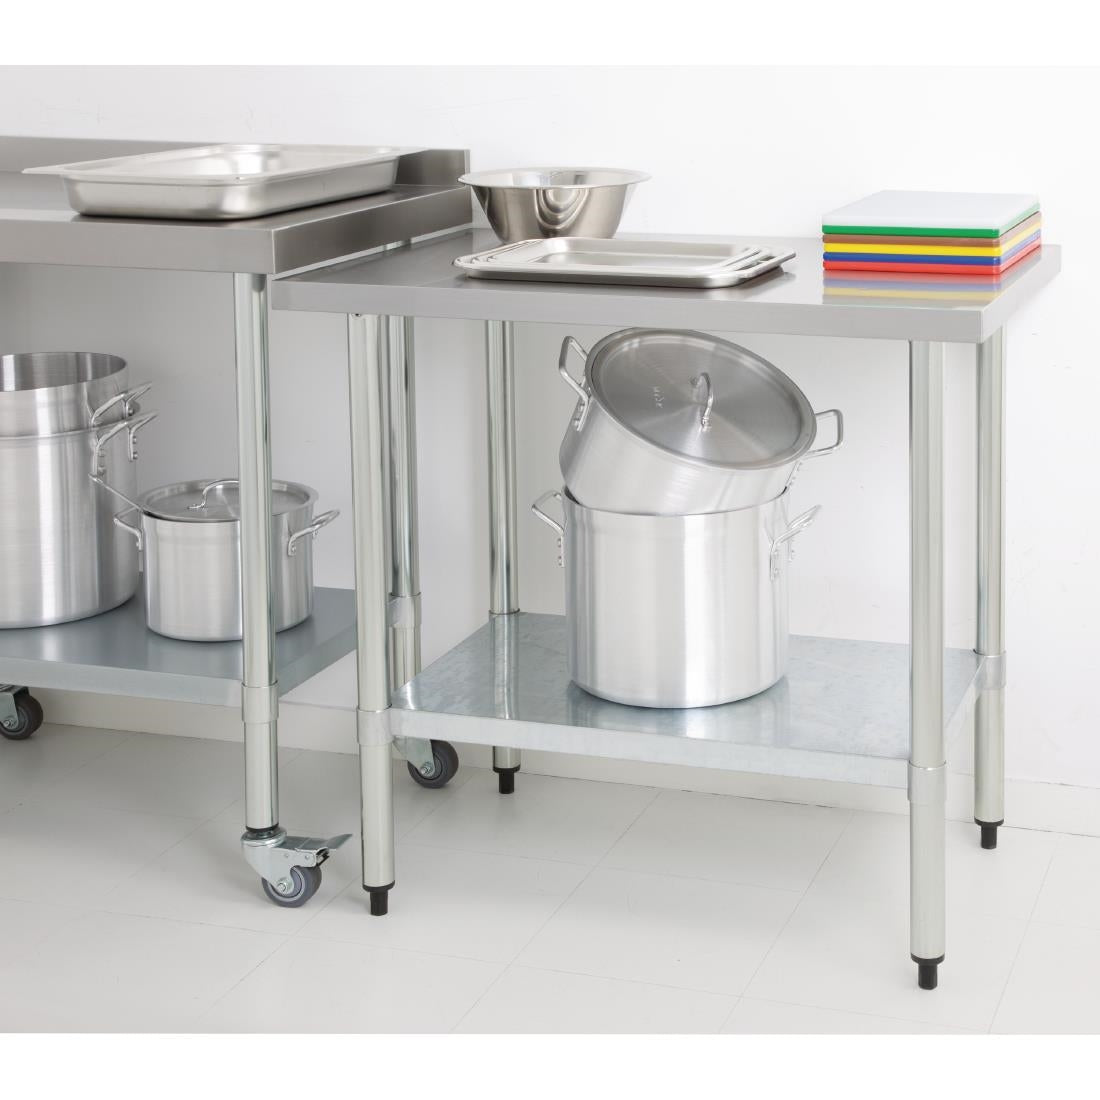 GJ502 Vogue Stainless Steel Prep Table 1200mm JD Catering Equipment Solutions Ltd